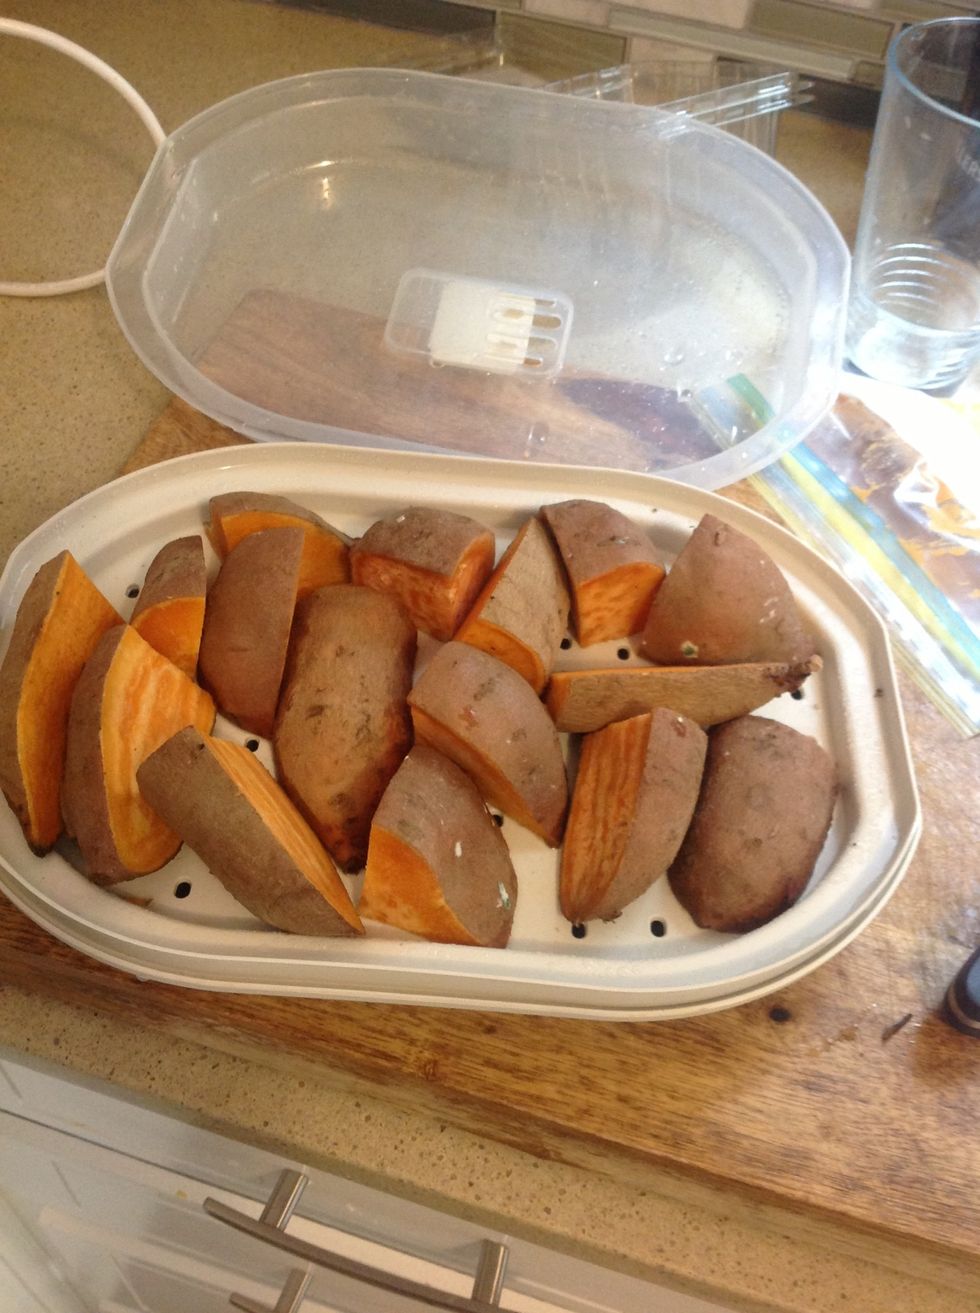 First, clean, slice up, and  steam or boil the sweet potatoes.  I like to use this handy-dandy microwave steamer, but you can do it any way you want!  I also like to leave the skin on, it's good!